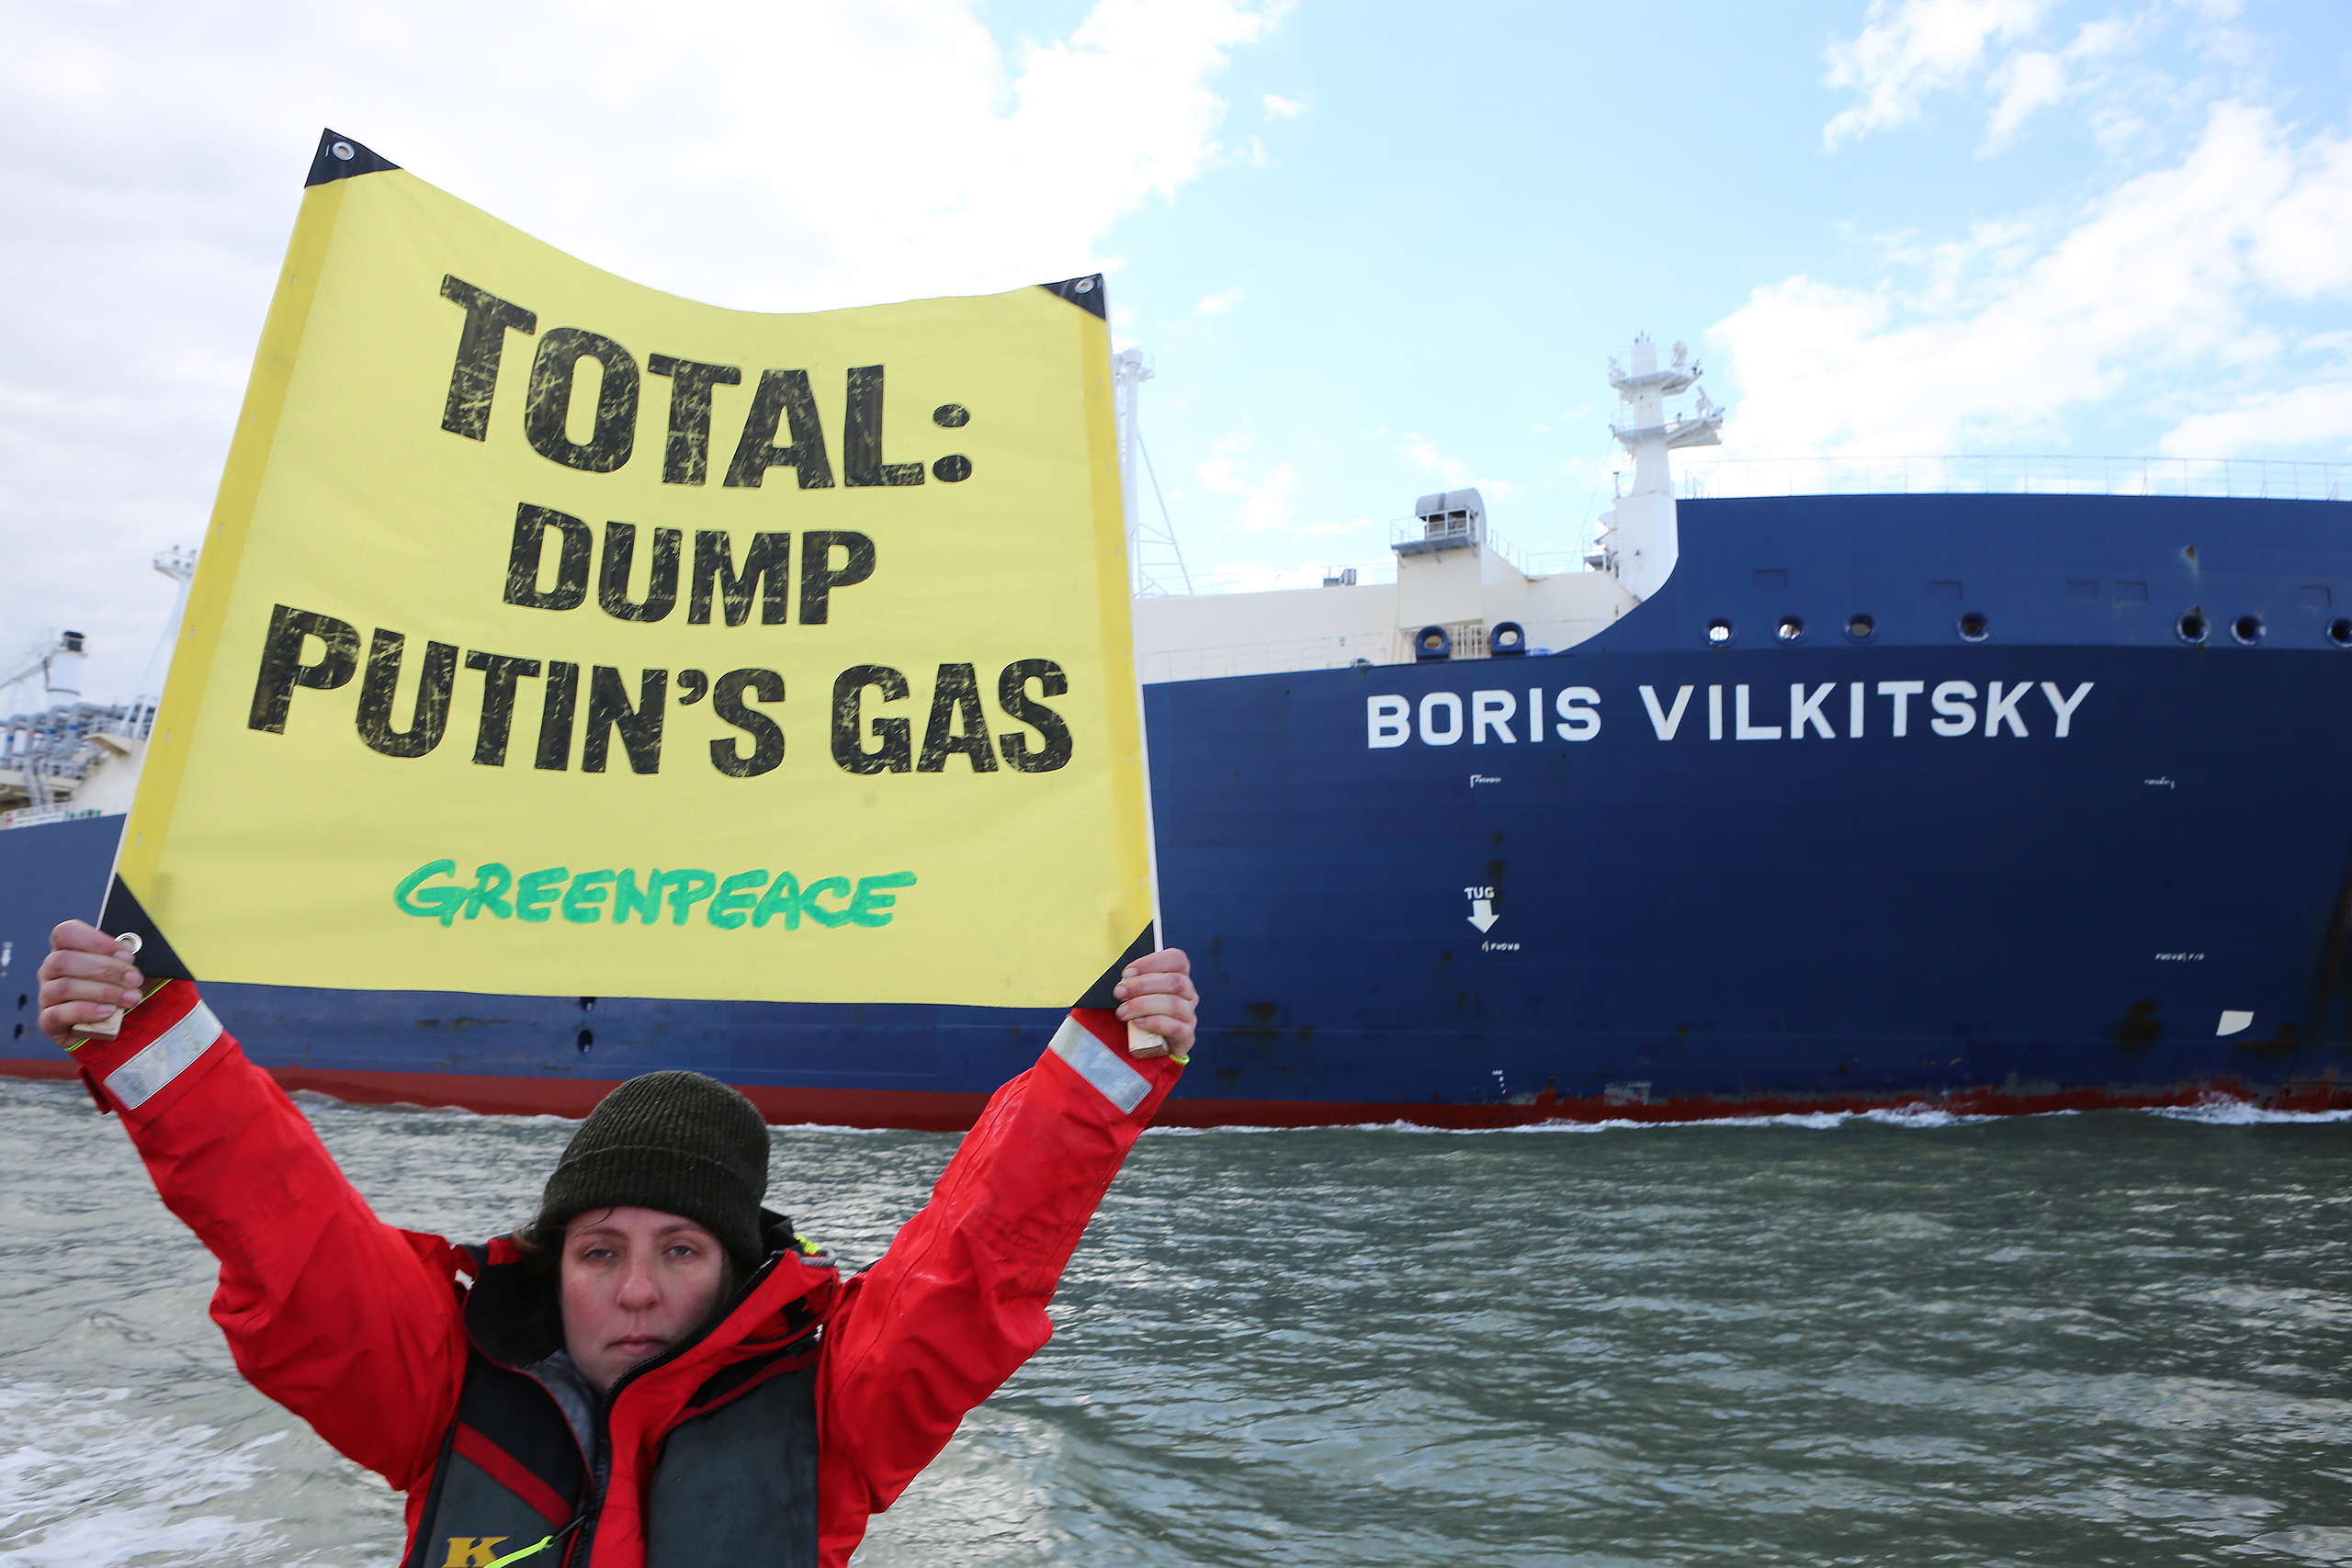 Greenpeace activists are protesting against the arrival of an LNG carrier from Yamal, one of the largest gas sites in Russia, of which TotalEnergies is a partner